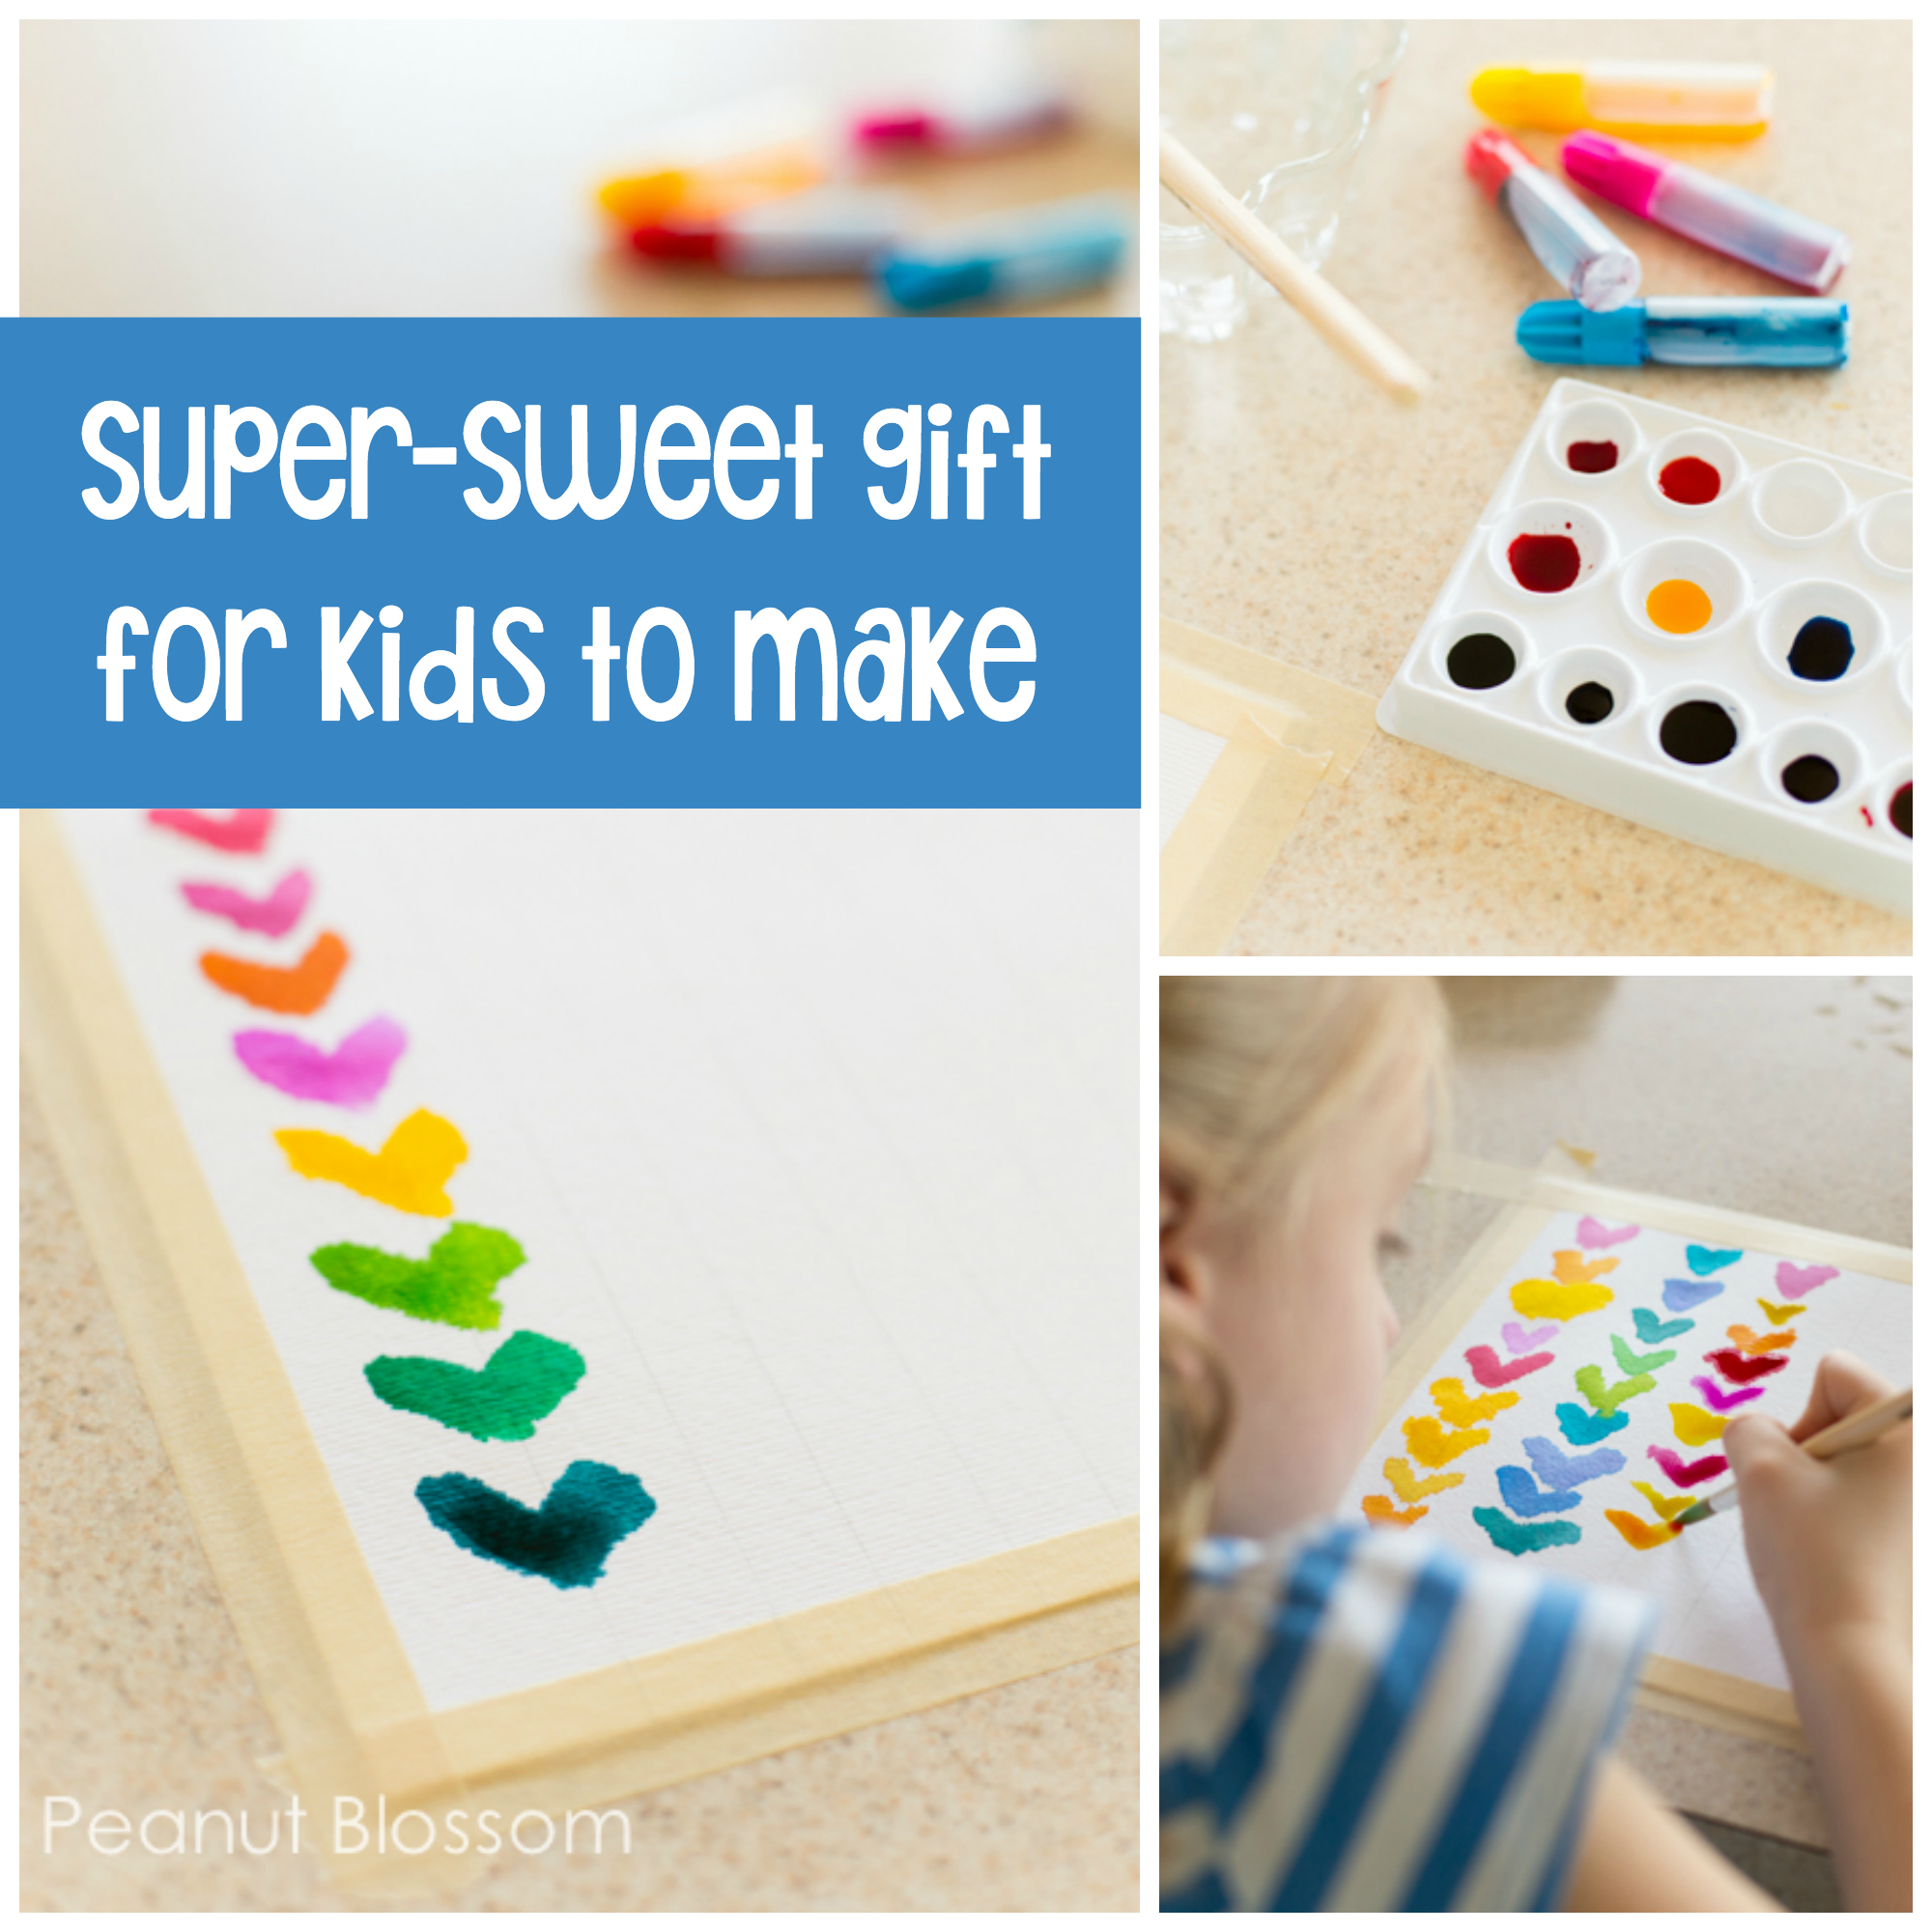 Super-sweet gift for kids to make: This rainbow hearts watercolor paint project is easy for even the littlest ones to paint for a sweet gift.